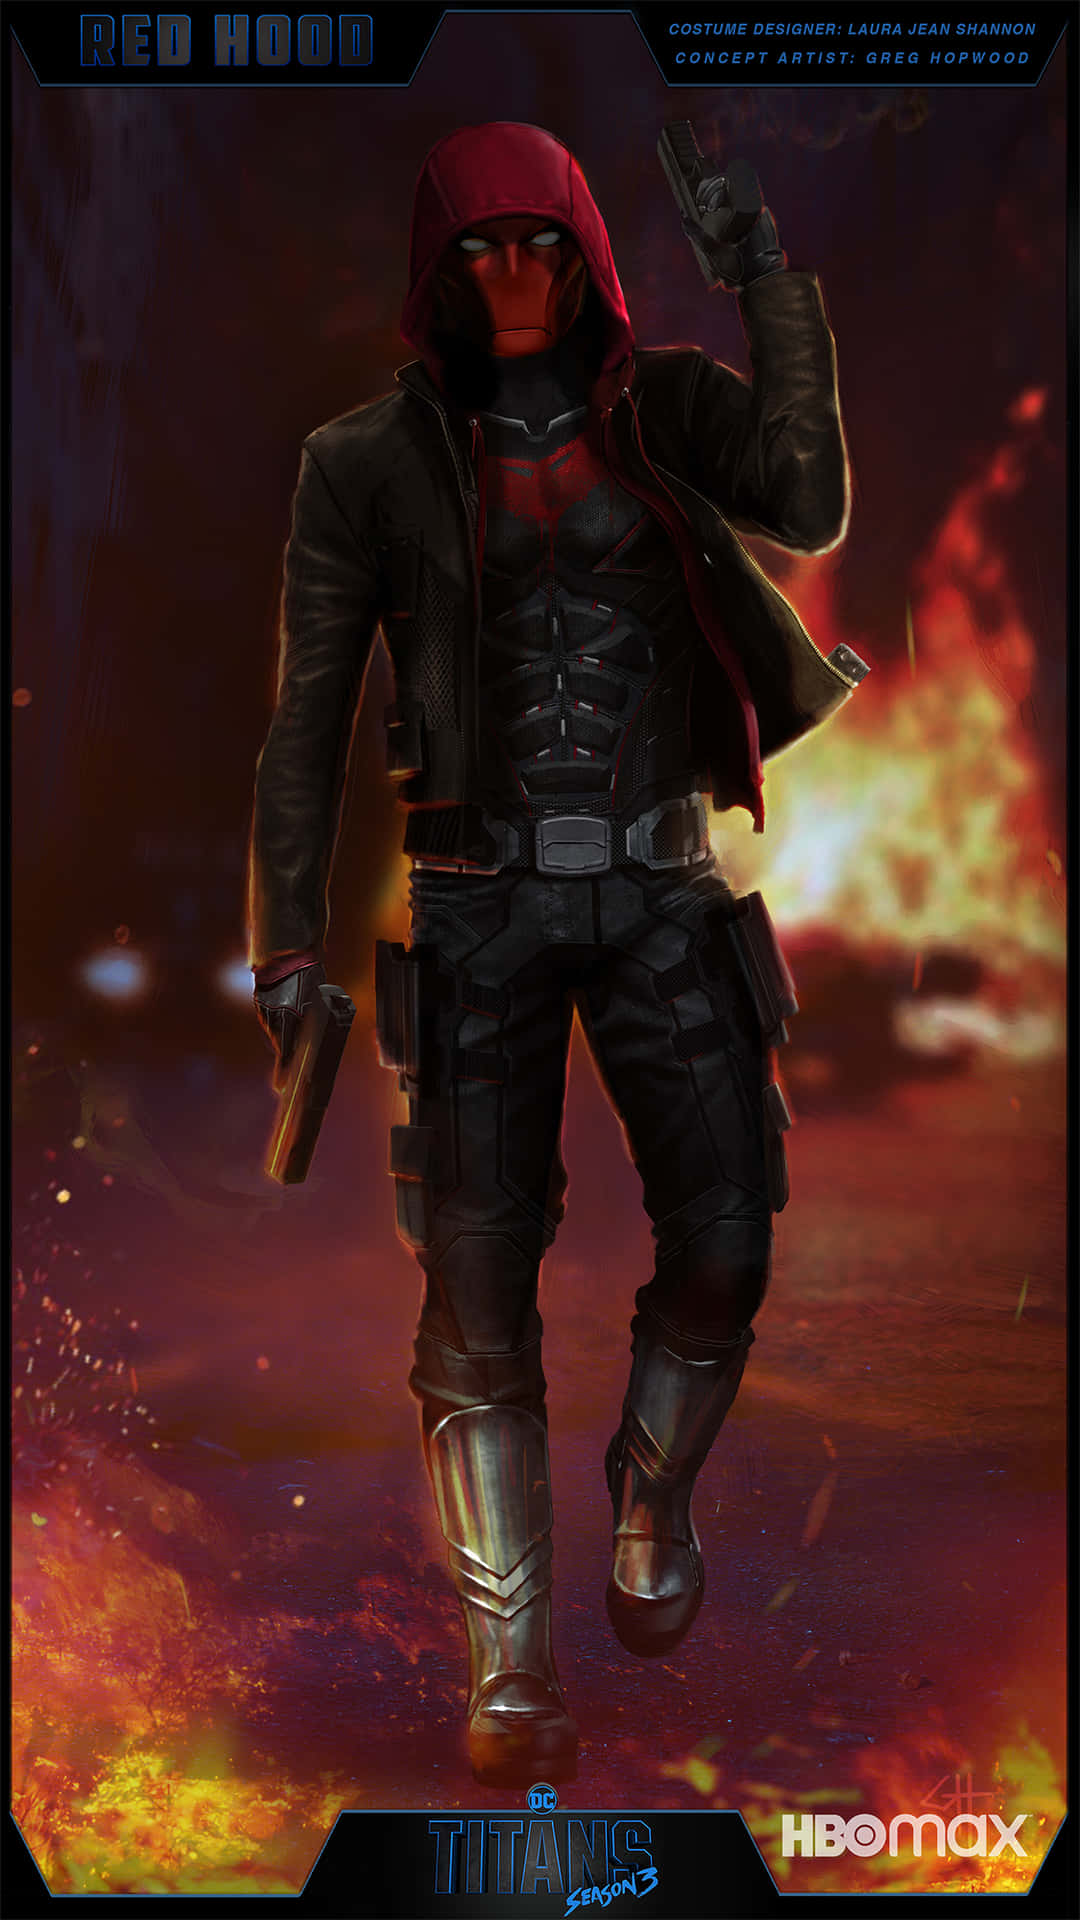 A Character In A Red Hood Costume With A Gun